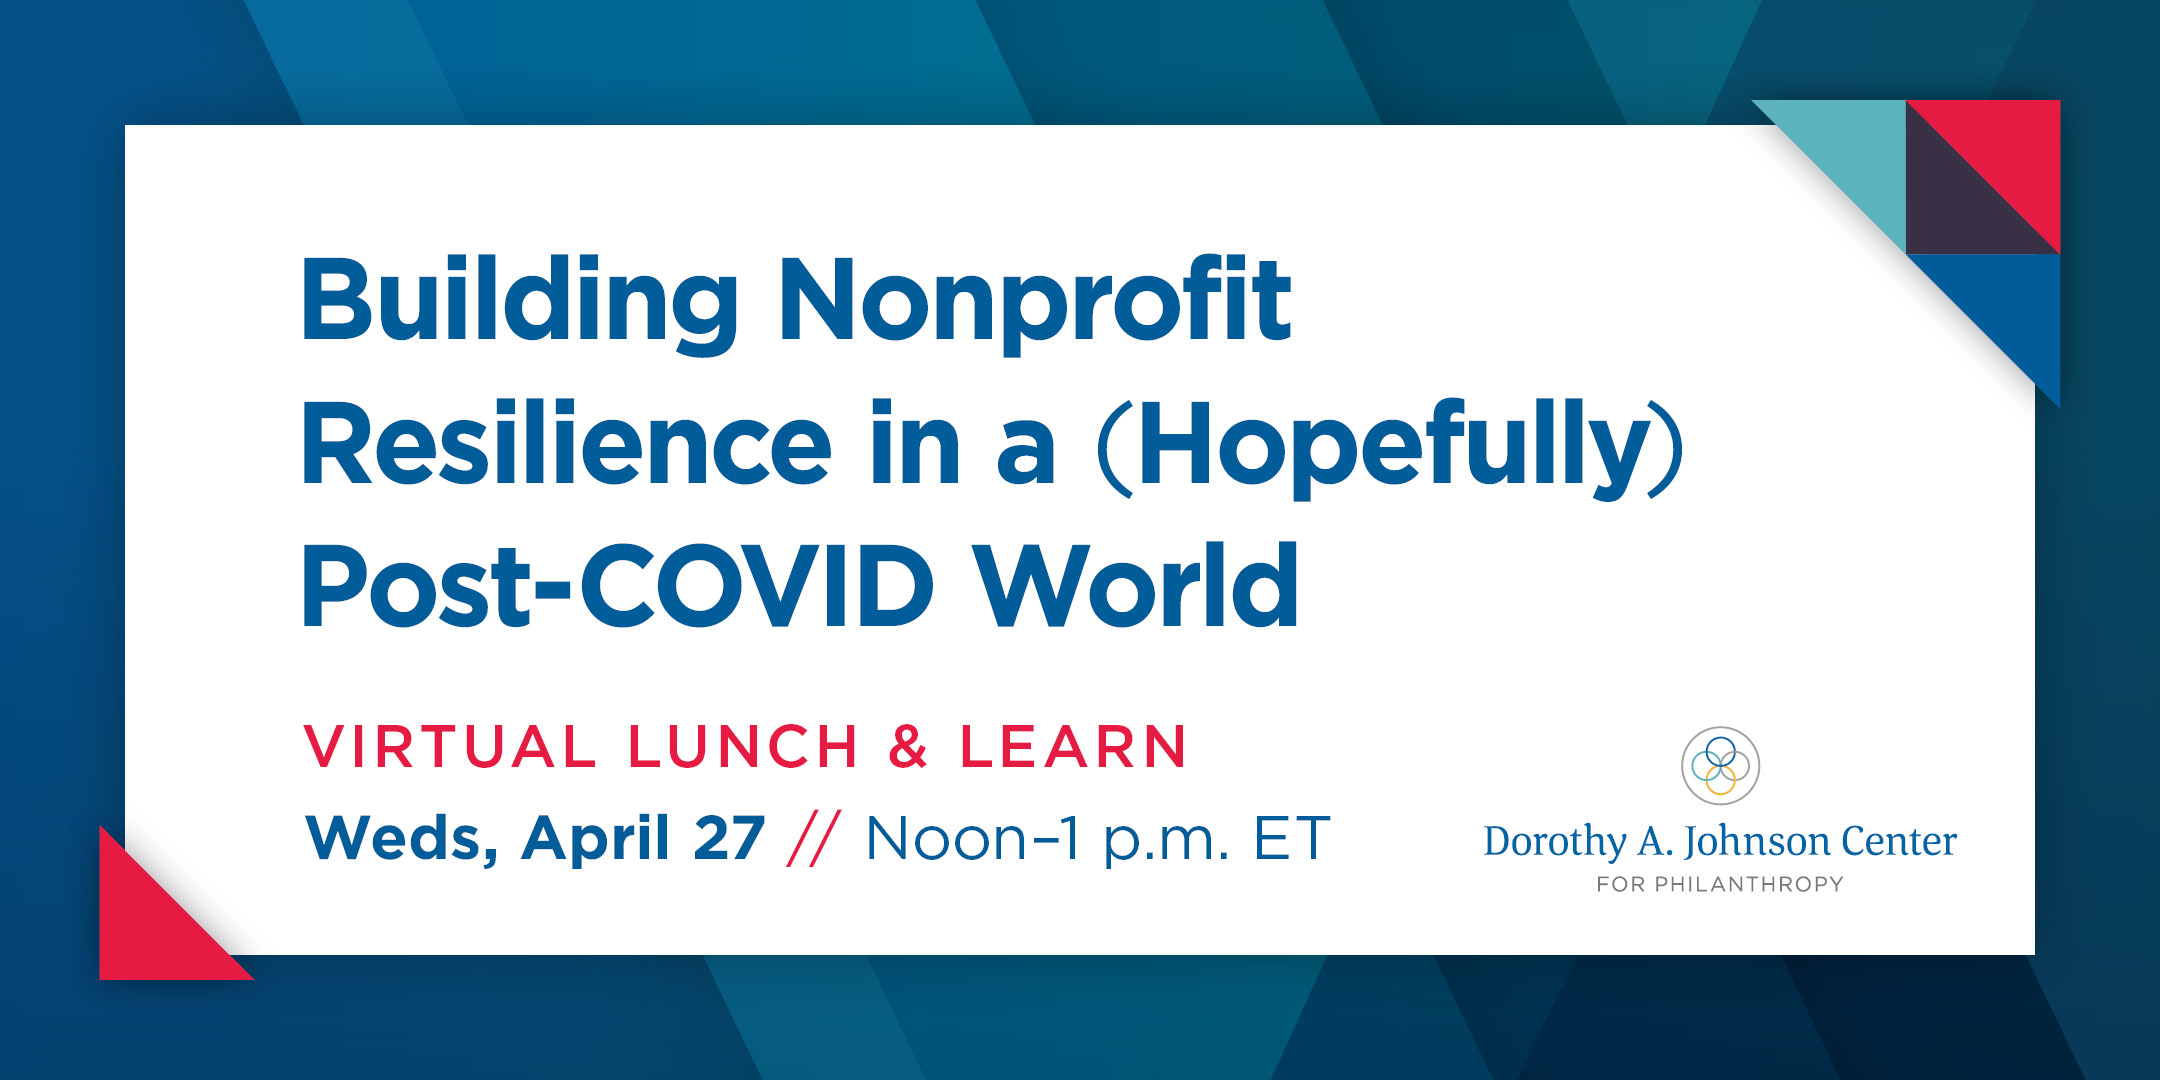 Building Nonprofit Resilience in a (Hopefully) Post-COVID World: A virtual lunch & learn event